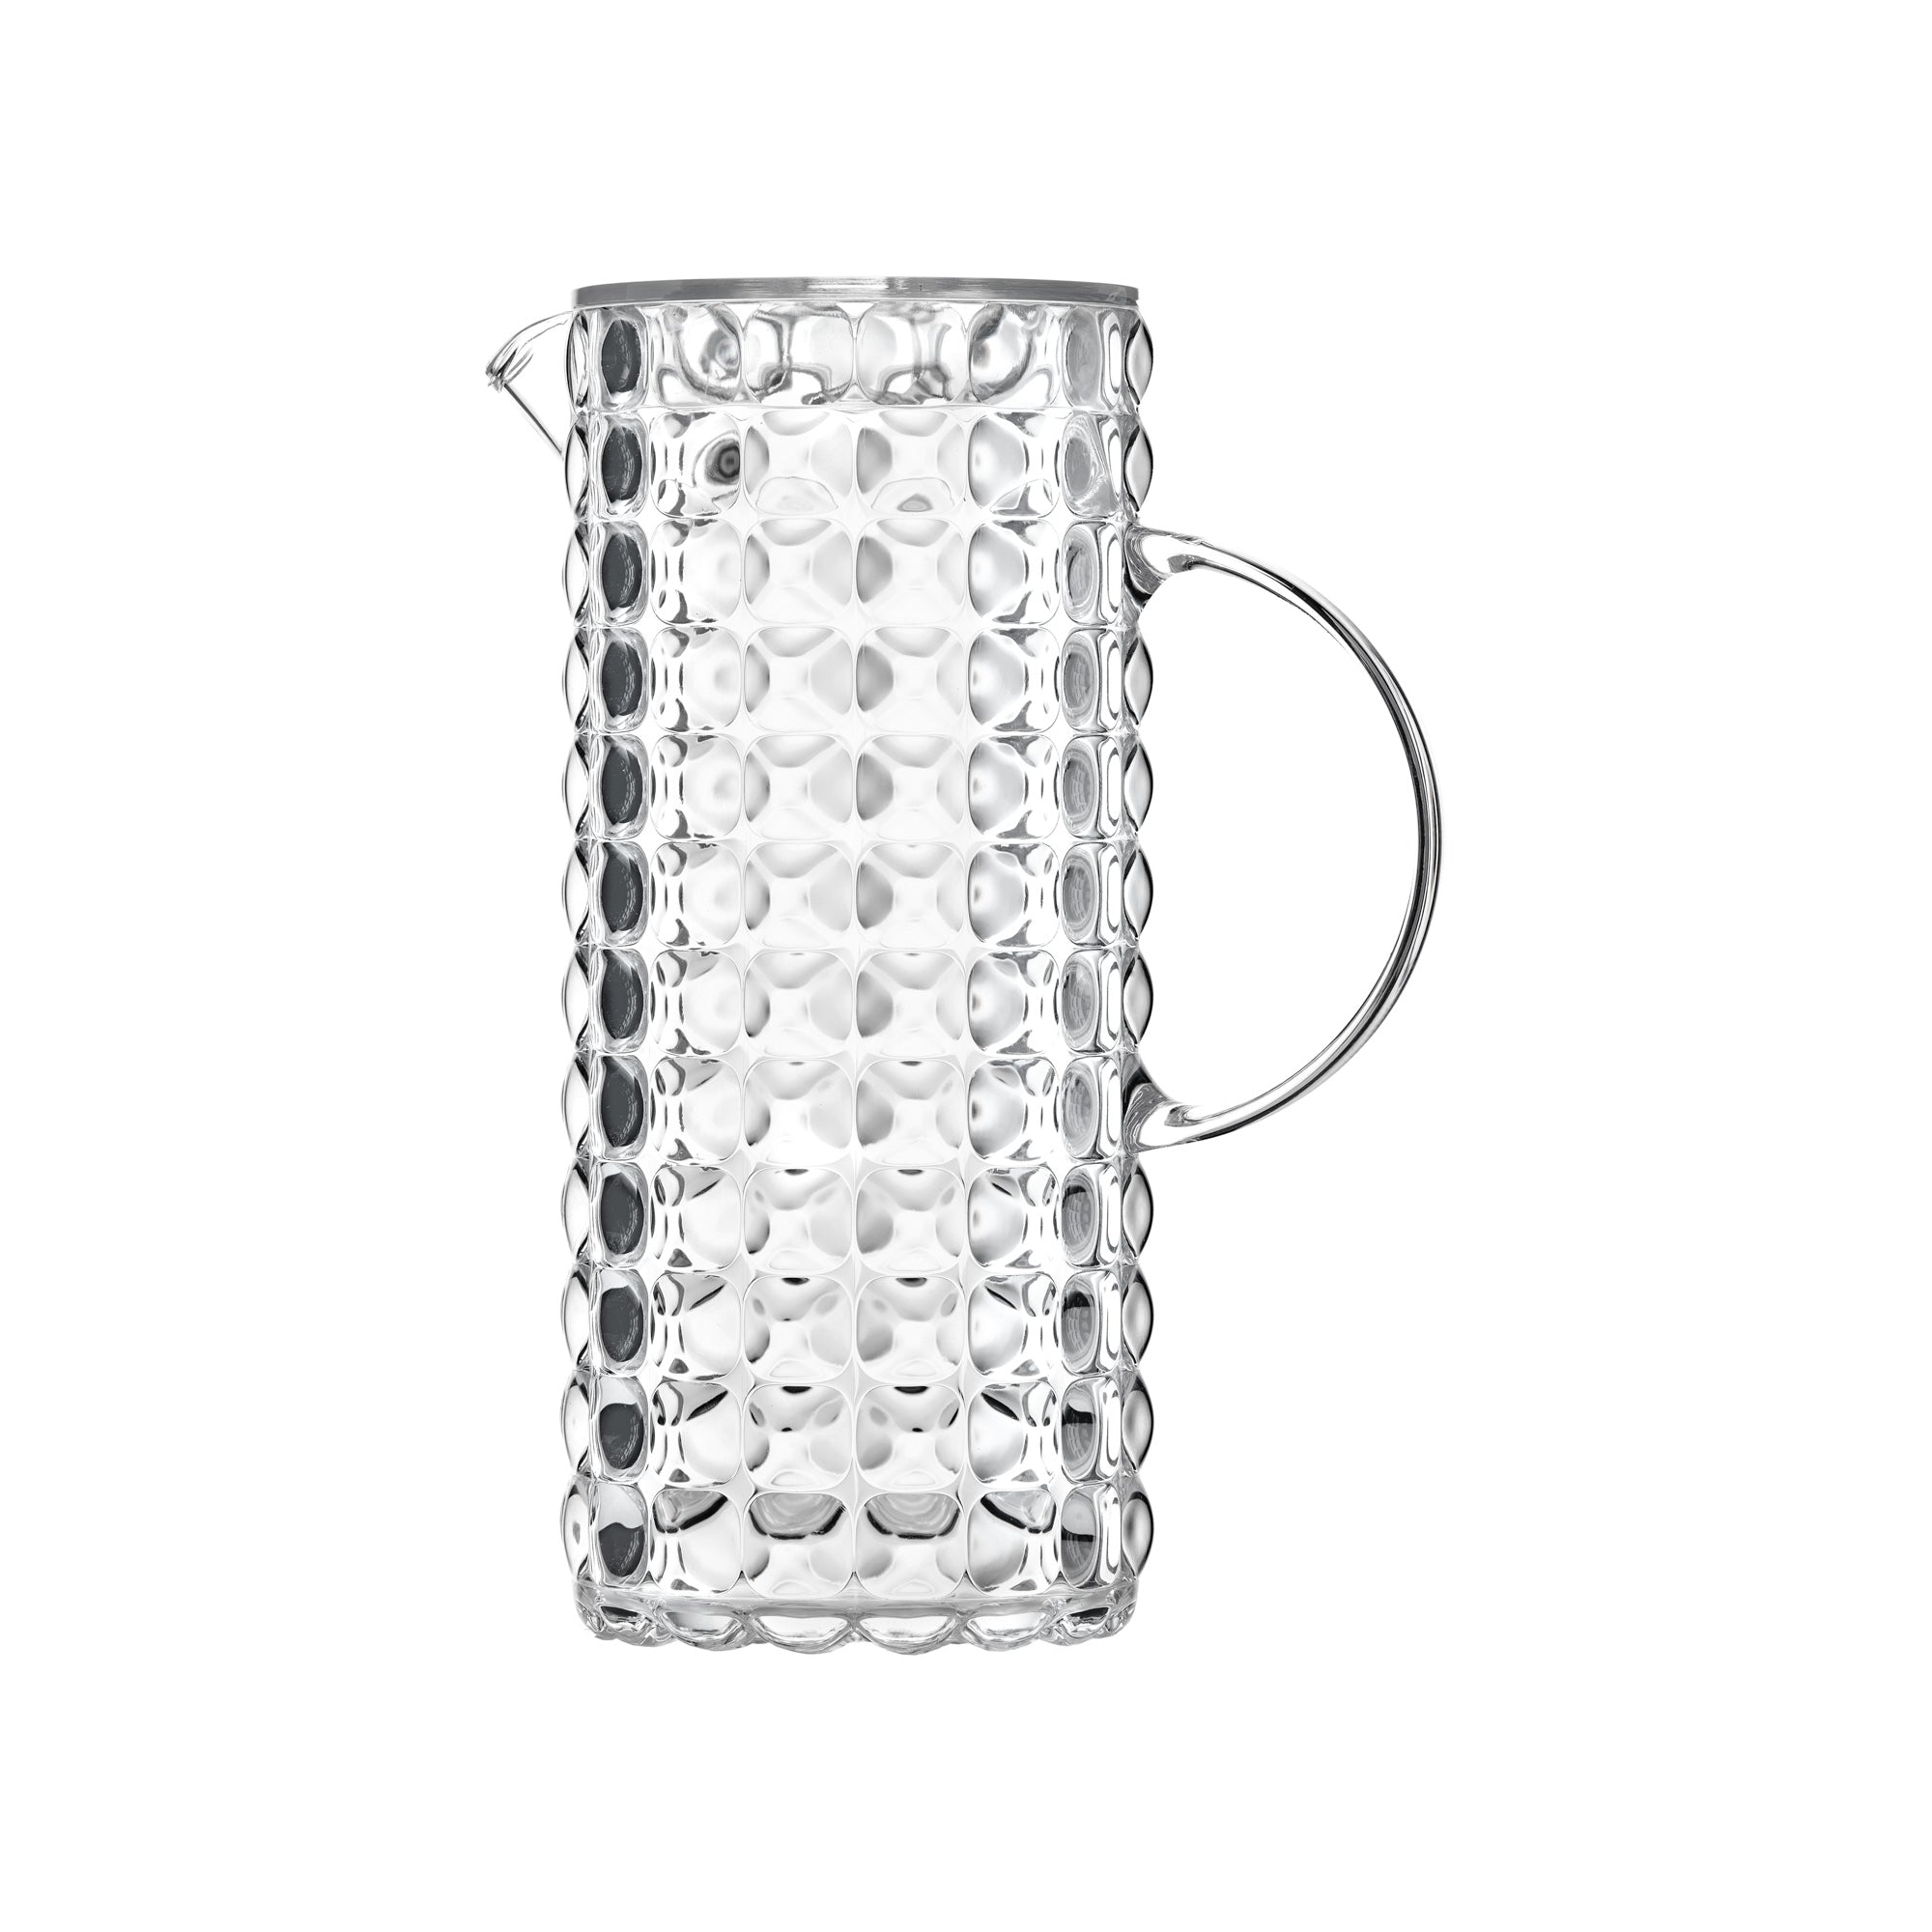 PITCHER WITH LID "TIFFANY"